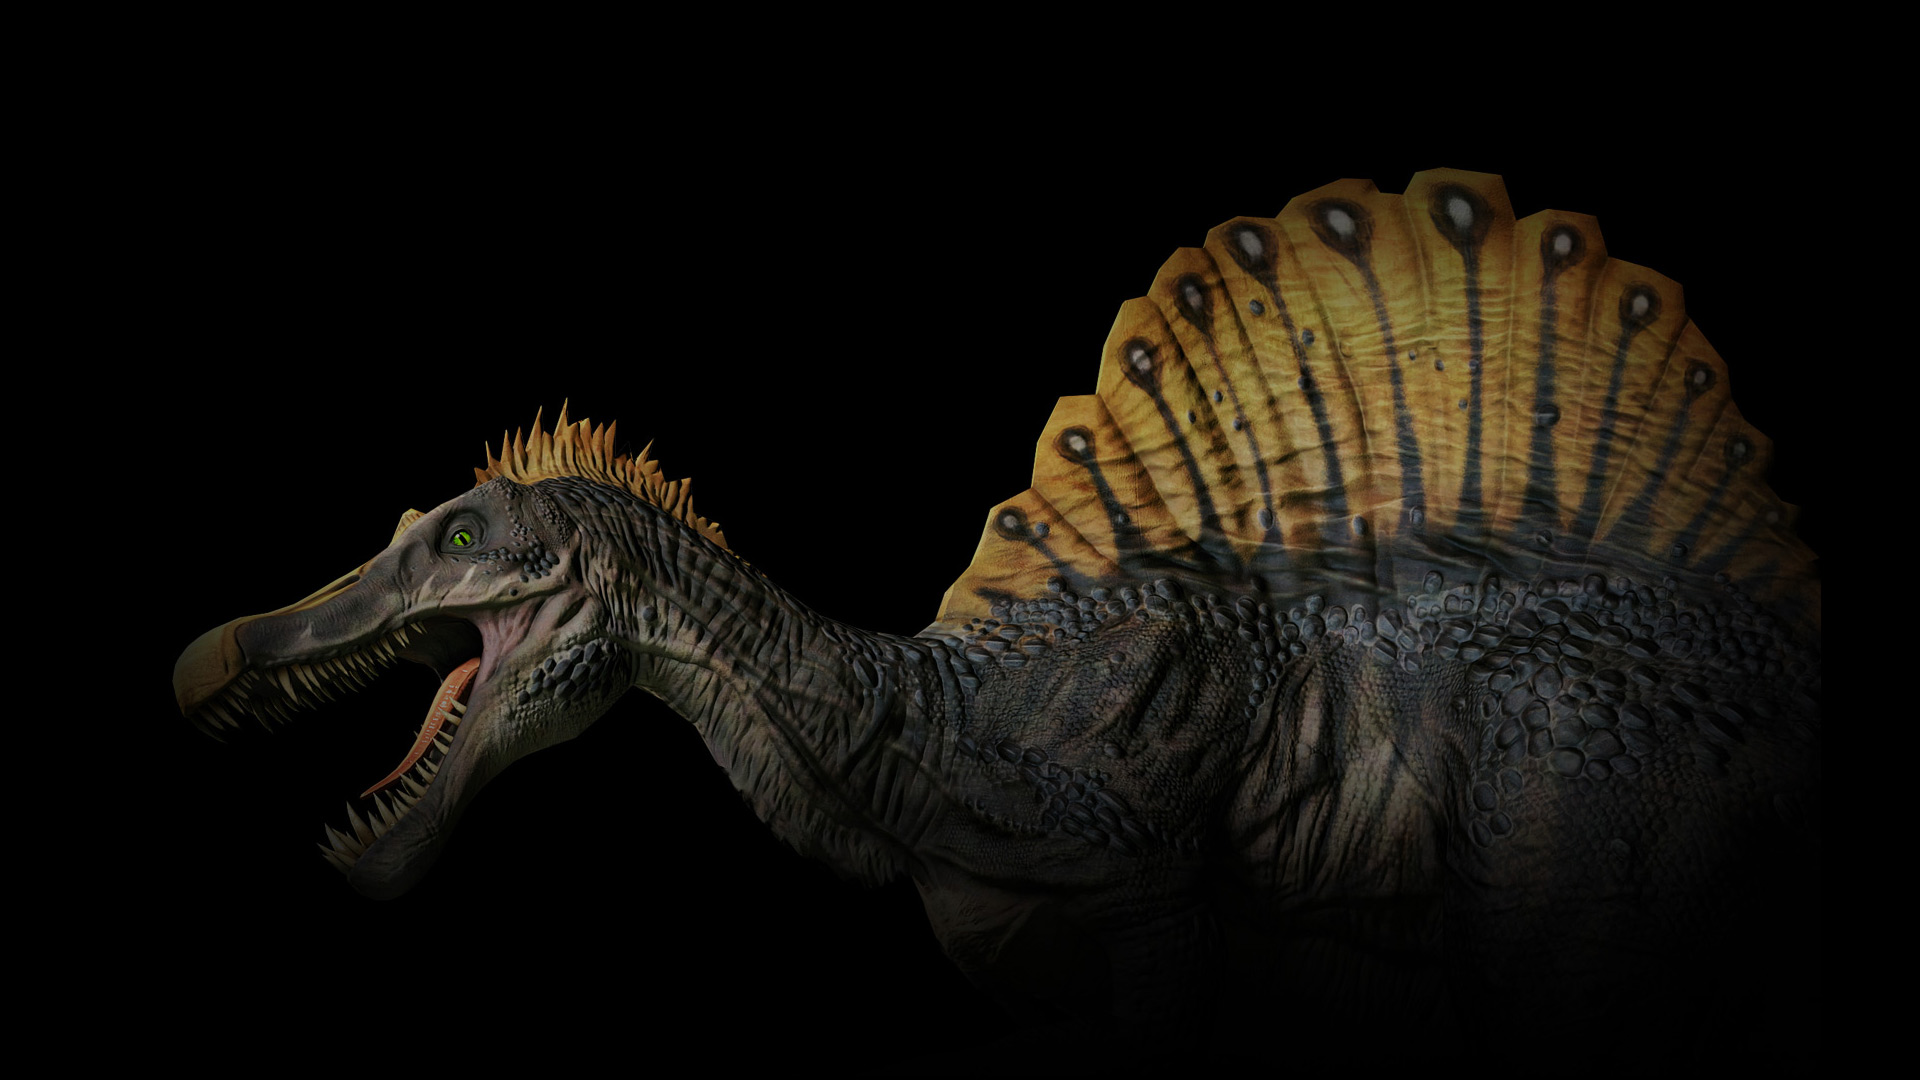 Gallery For Gt Primal Carnage Spinosaurus